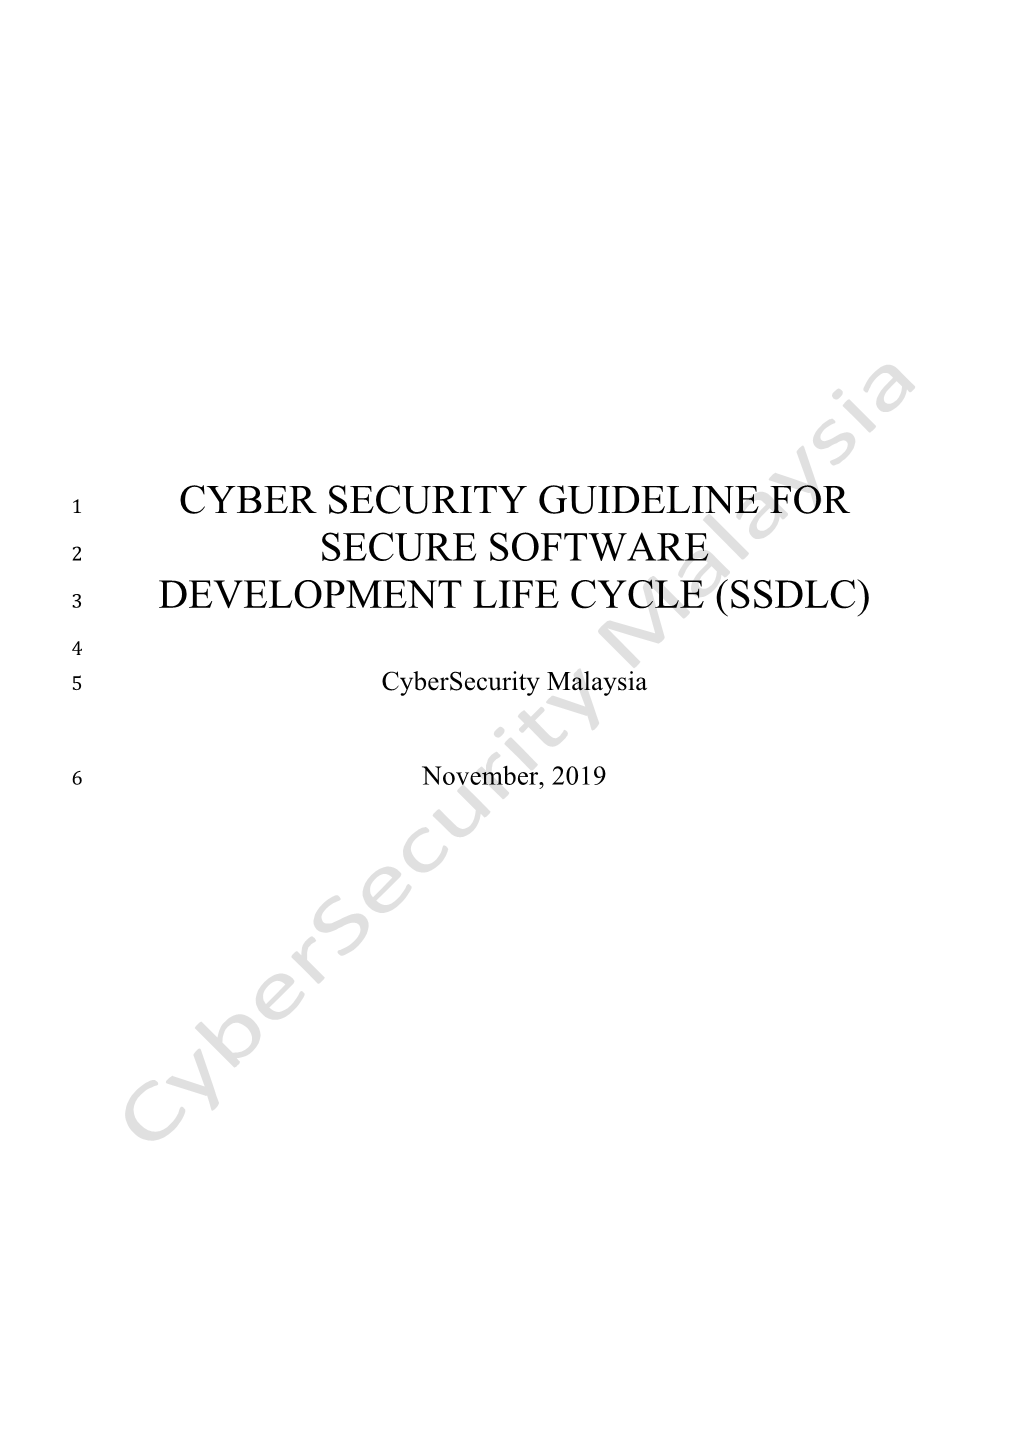 Cyber Security Guideline for Secure Software